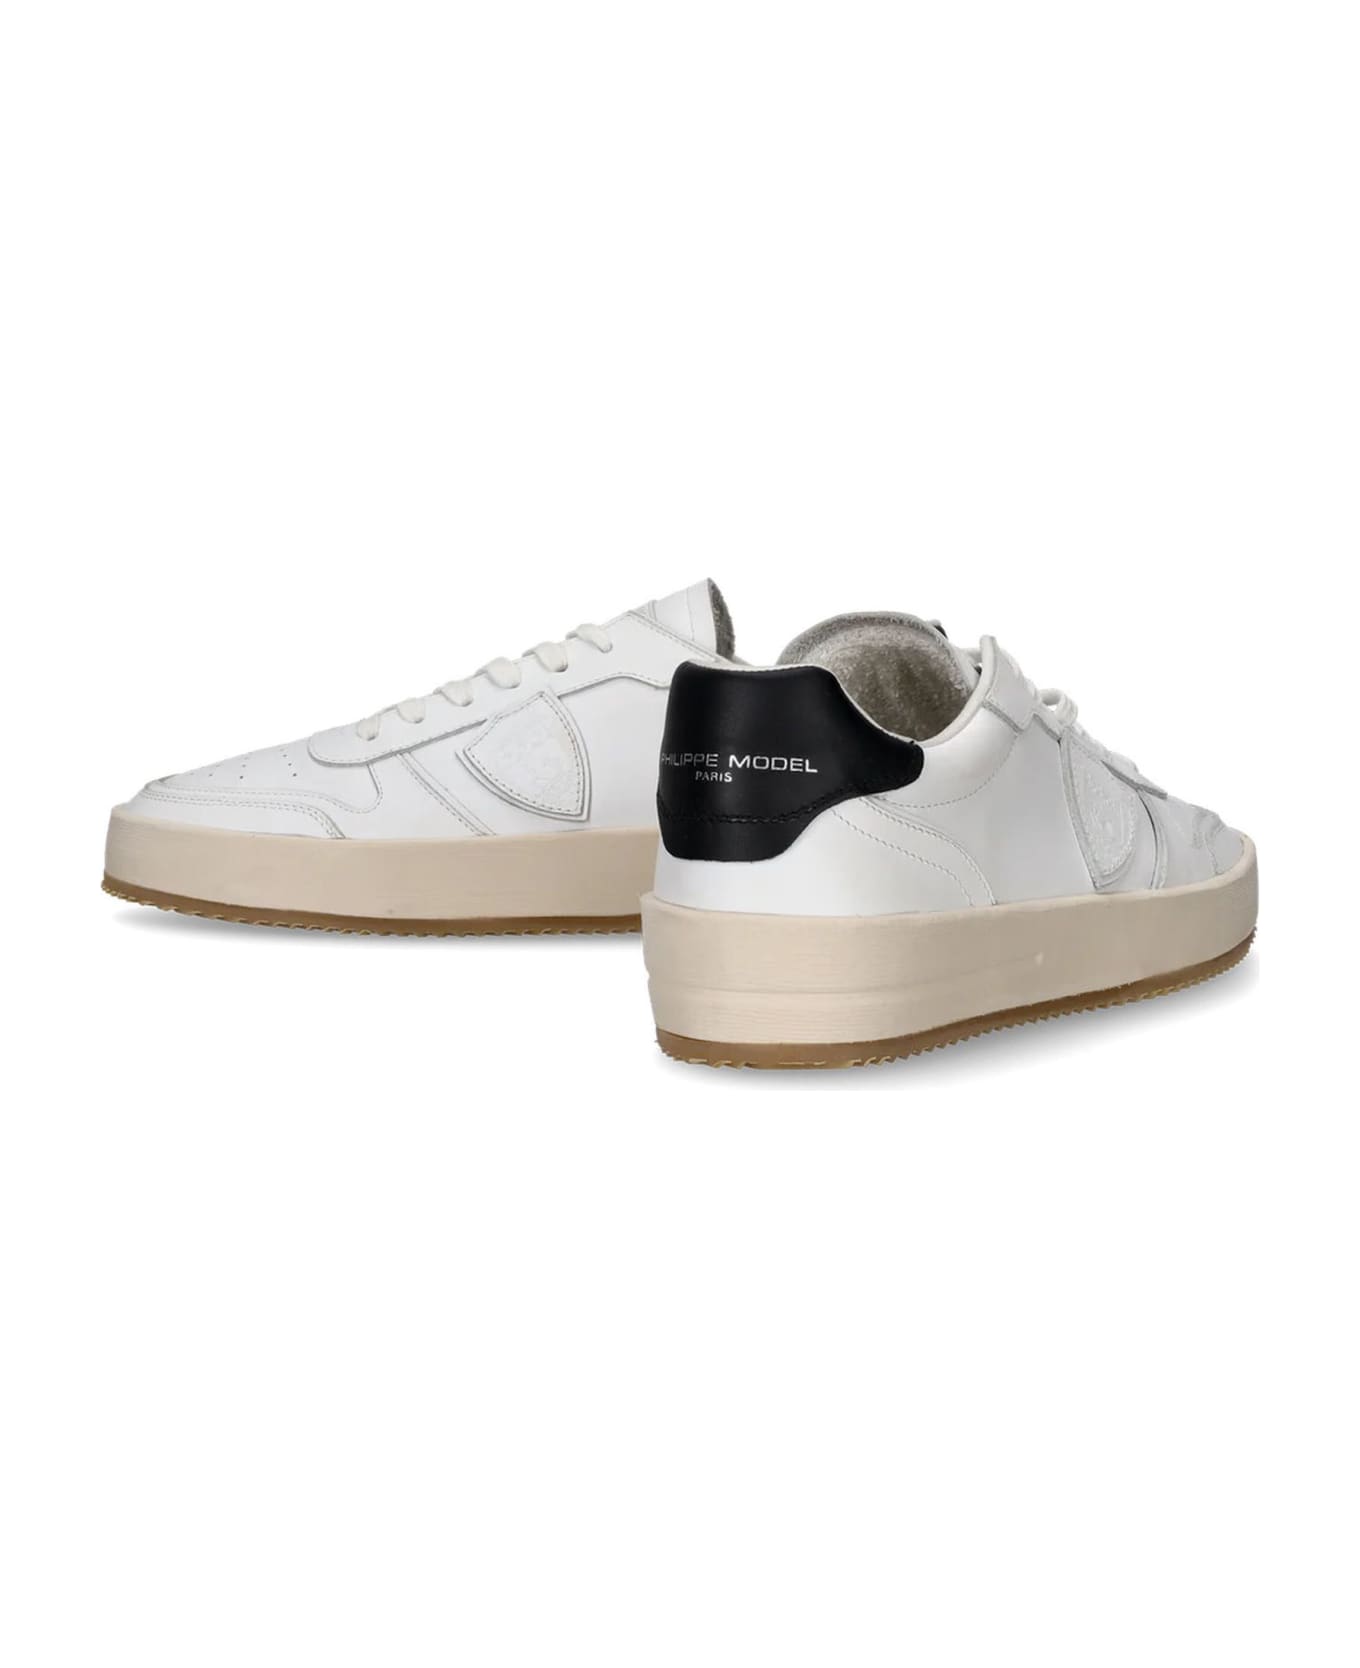 Philippe Model Nice Low-top Sneakers In Leather, White Black - White